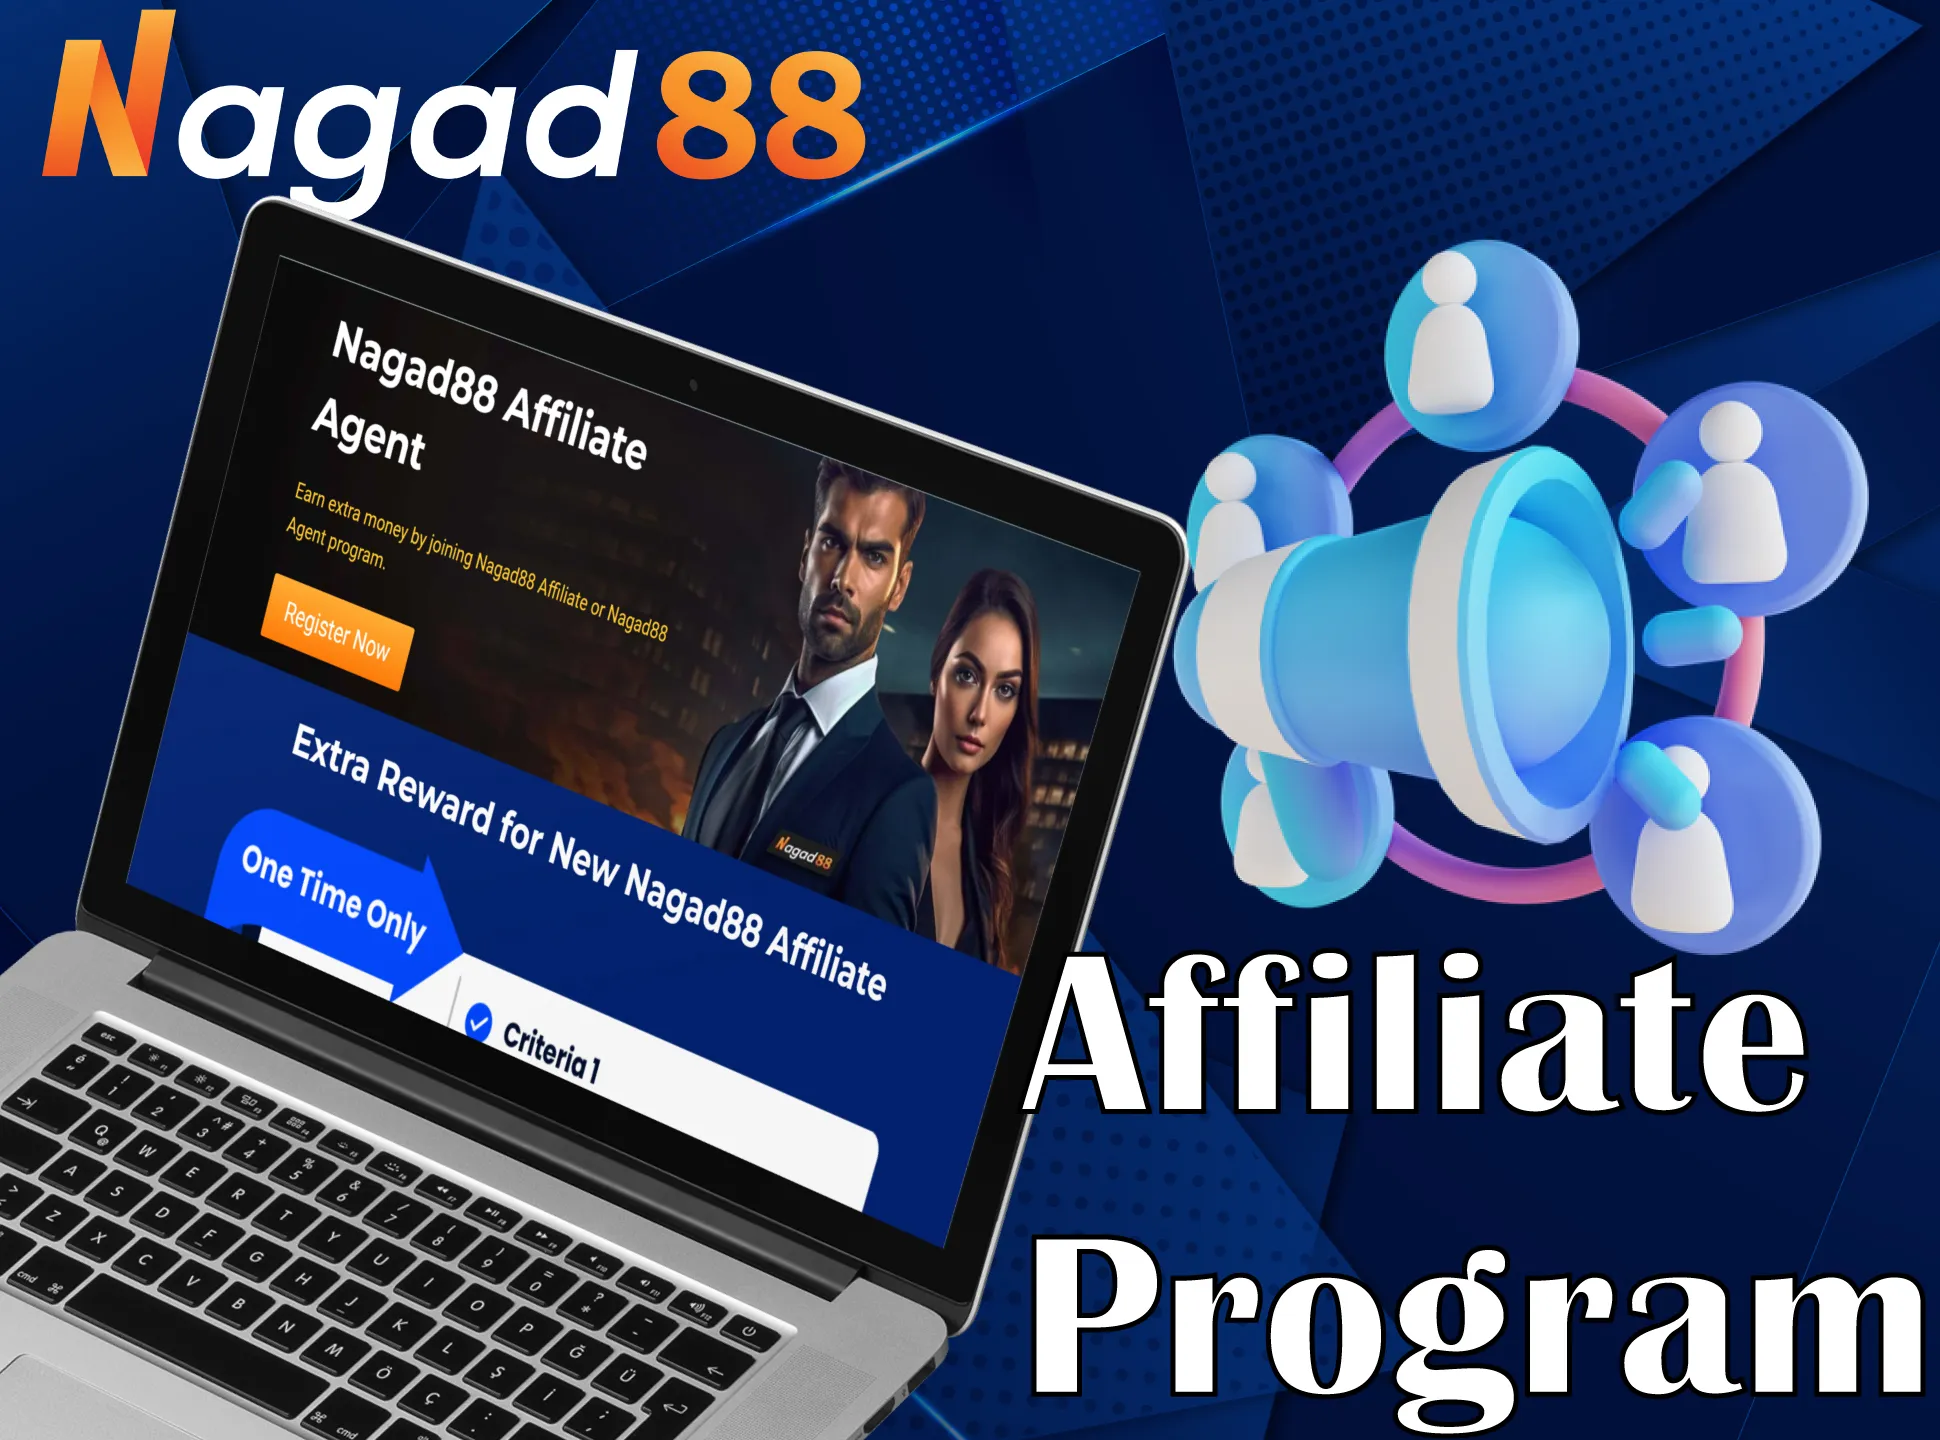 Try the Nagad88 affiliate program and get additional profit from inviting new users.